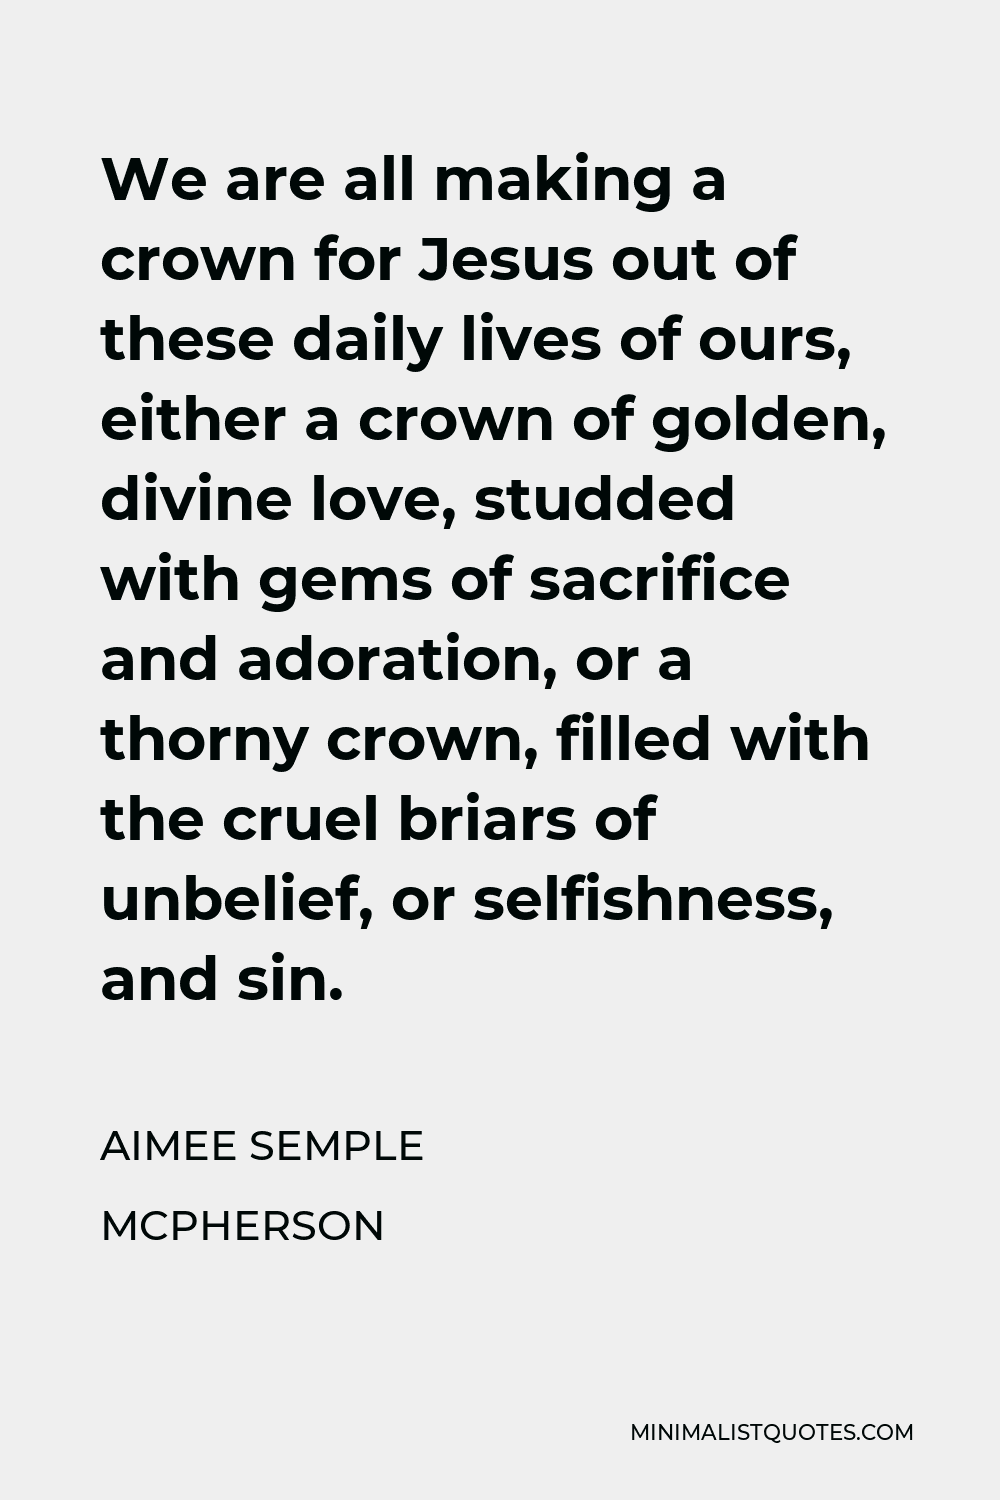 Aimee Semple McPherson Quote - We are all making a crown for Jesus out of these daily lives of ours, either a crown of golden, divine love, studded with gems of sacrifice and adoration, or a thorny crown, filled with the cruel briars of unbelief, or selfishness, and sin.